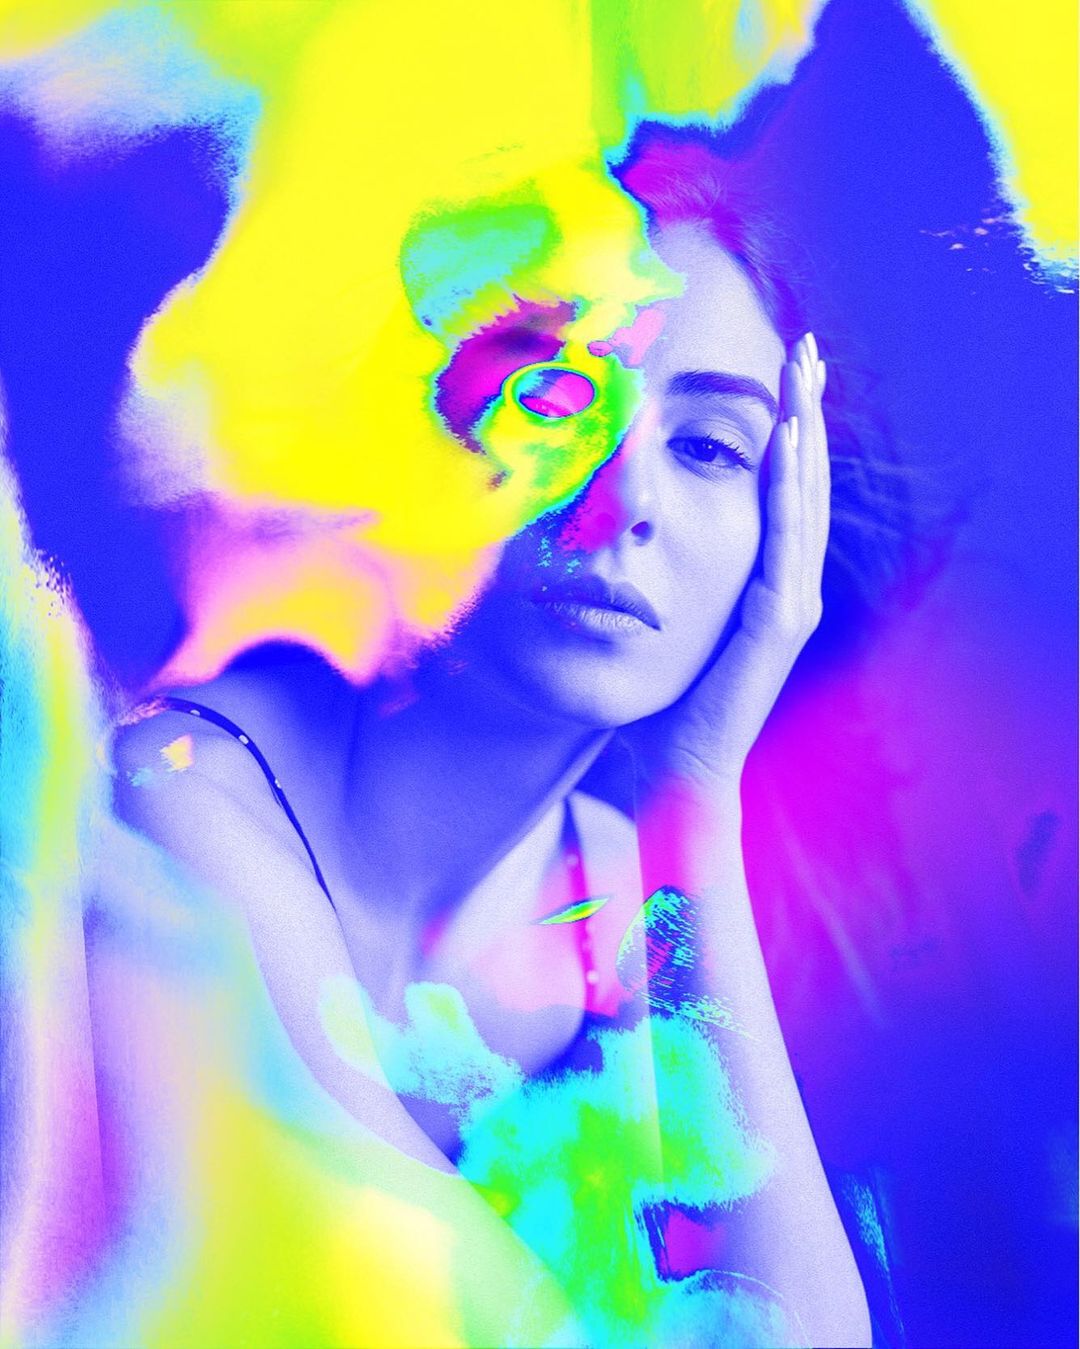 Erikson Aponte Creates Artworks Influenced by Psychedelia and The Color ...